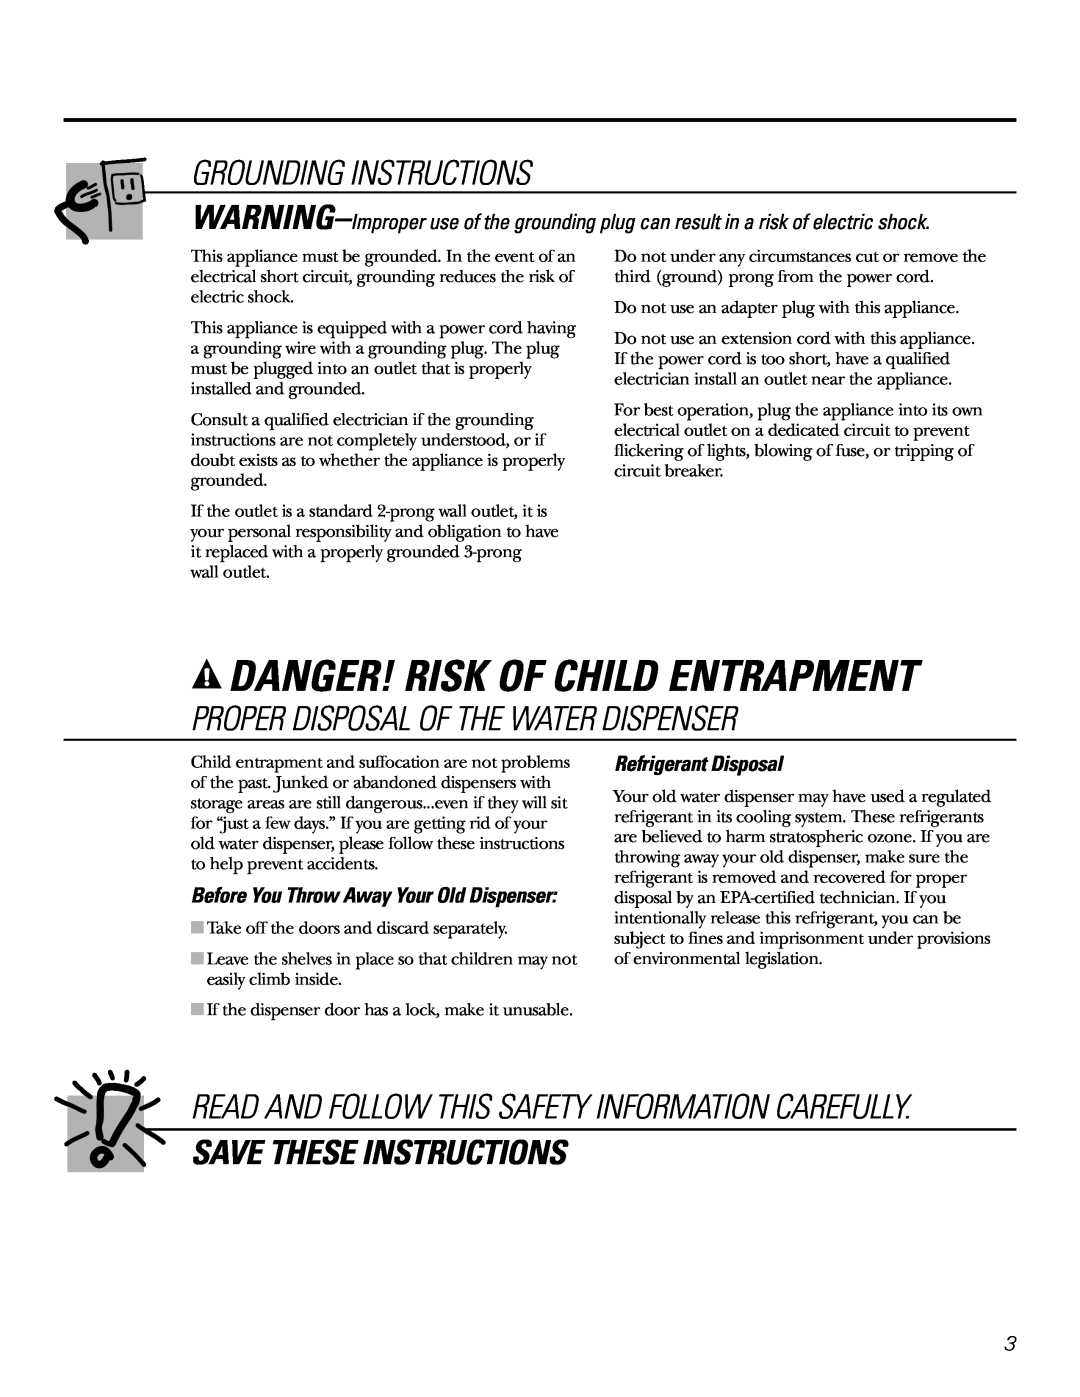 GE GXCF05D specifications Danger! Risk Of Child Entrapment, Grounding Instructions, Proper Disposal Of The Water Dispenser 